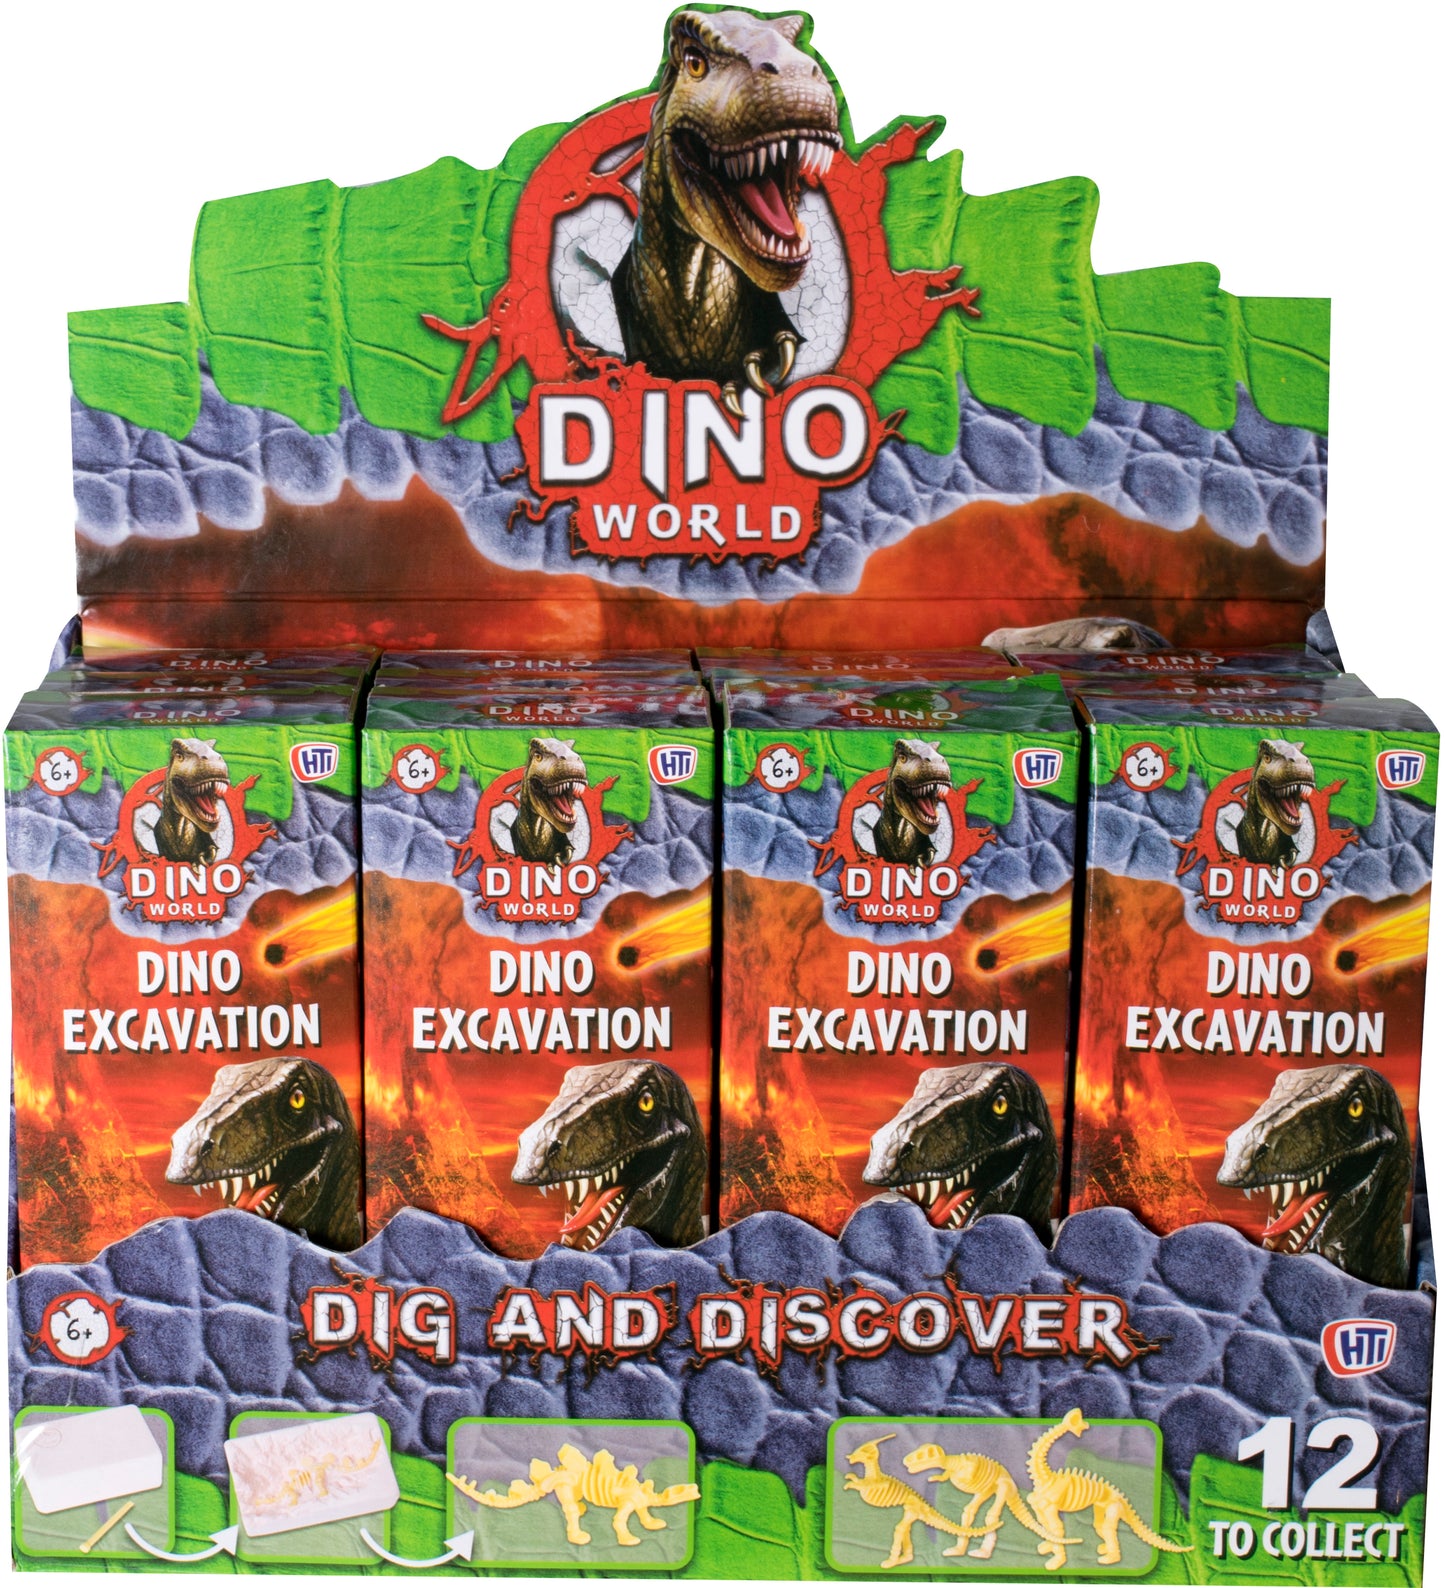 Dino World "Dig & Discover" Dinosaur Fossil Excavation Play Set